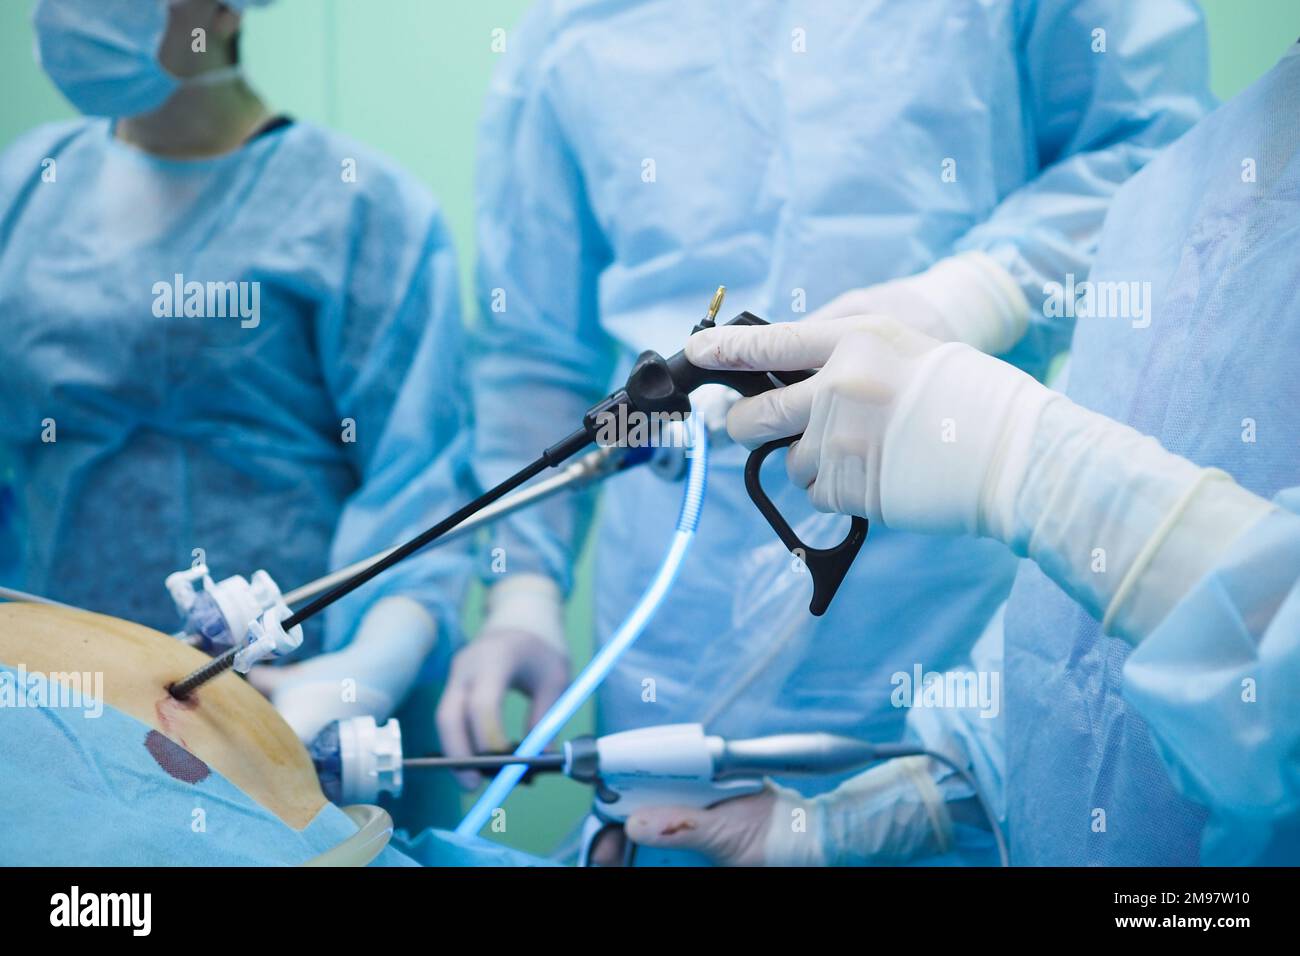 Laparoscopic surgical instruments in the hands of surgeons. Selective focus. Hands of surgeons in sterile gloves during surgery. Stock Photo